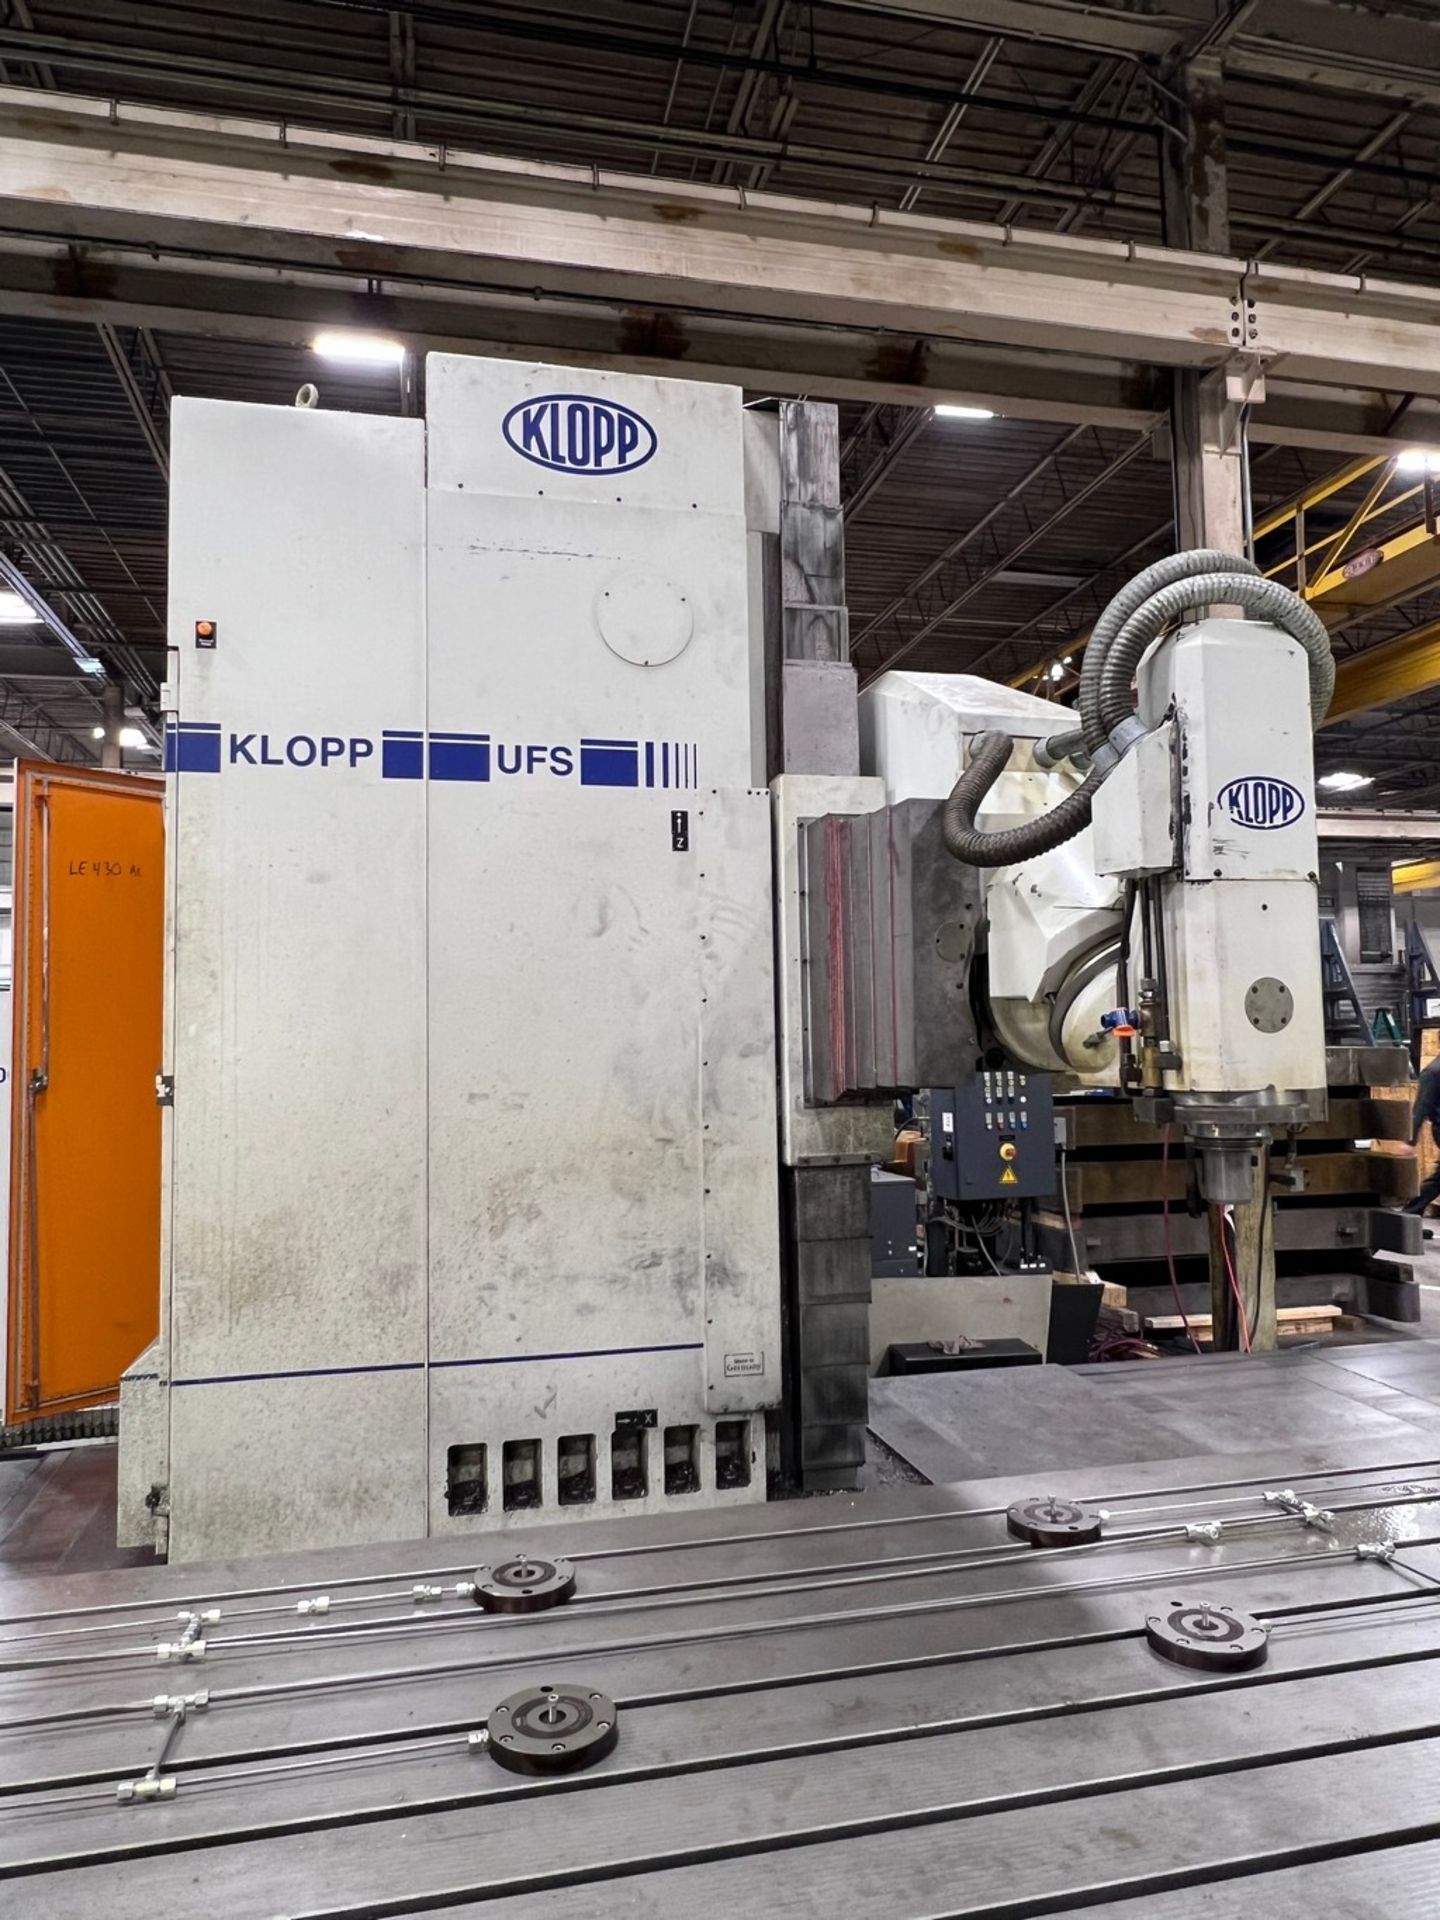 2007 Klopp UFS1000 CNC 5-Axis Travelling Column Milling Machine - Image 6 of 10